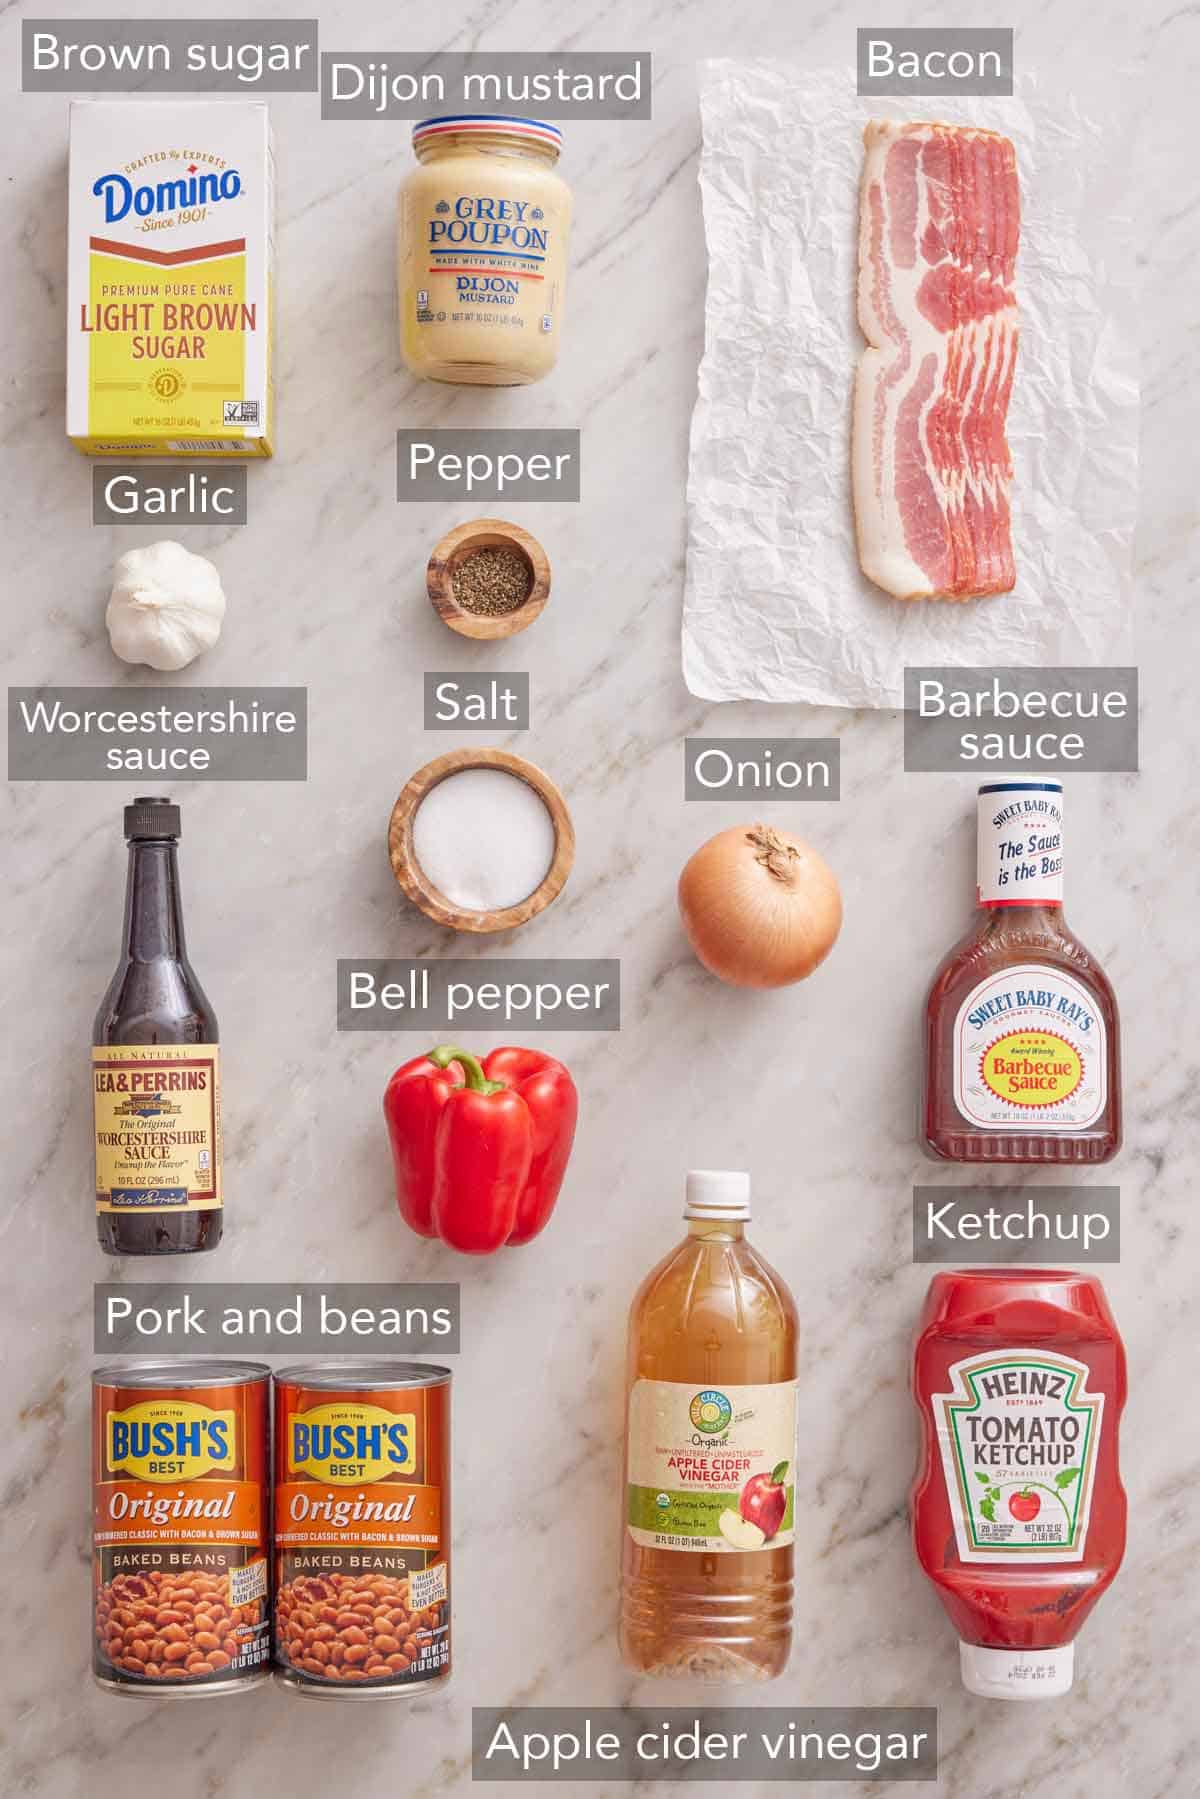 Ingredients needed to make baked beans.